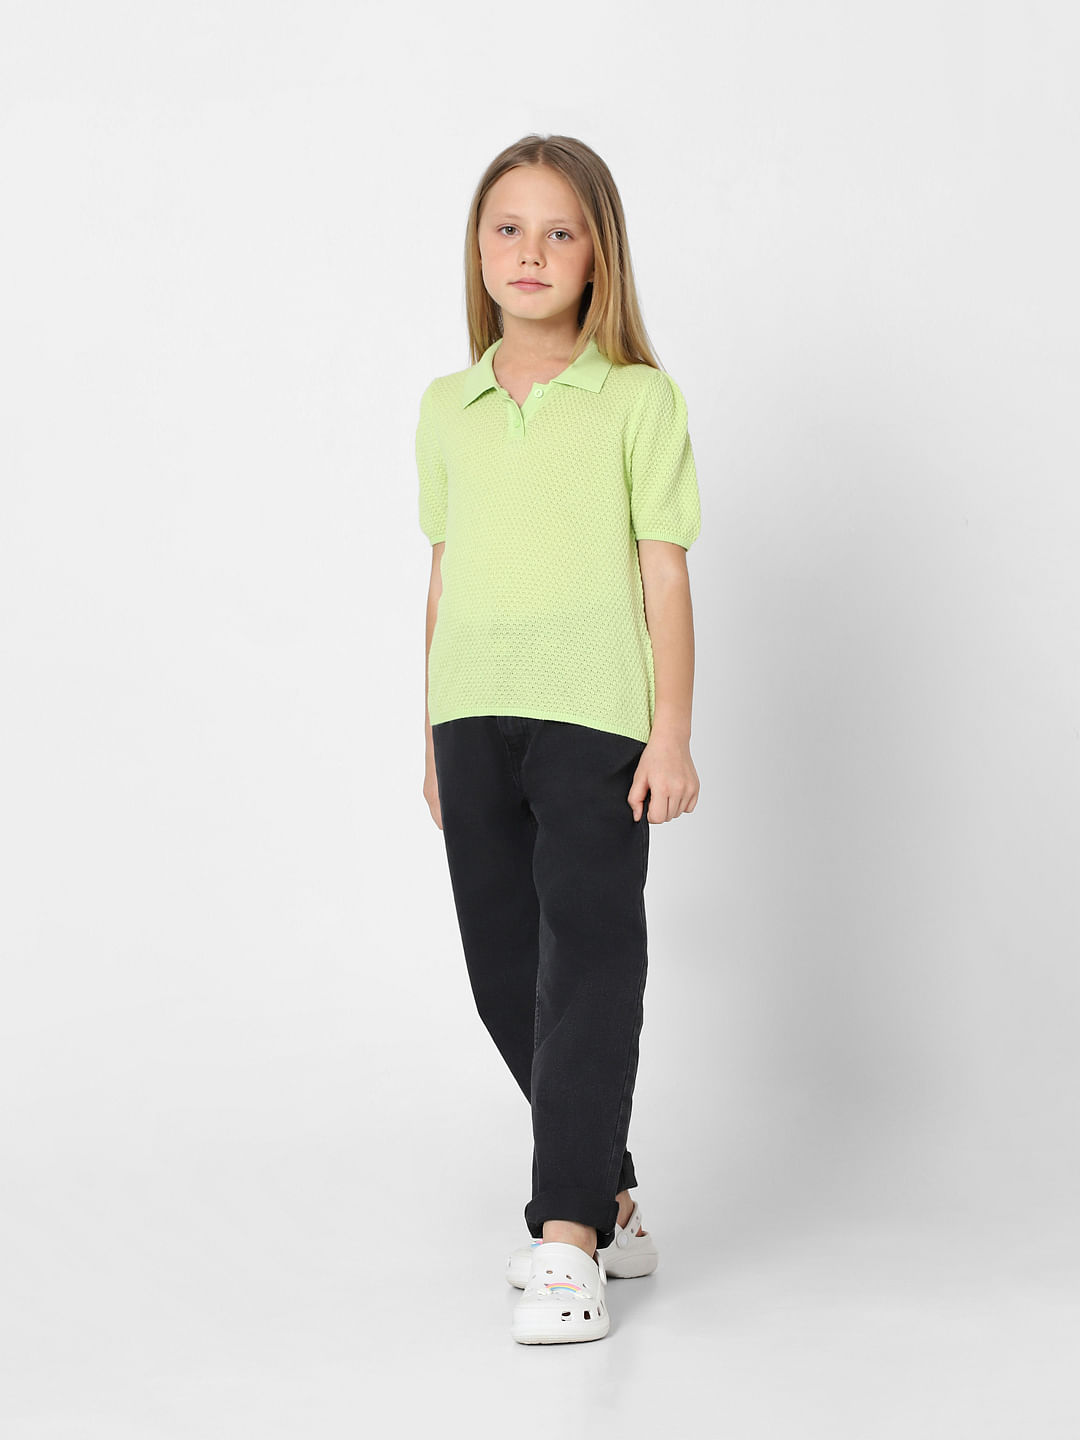 Buy u.s. polo assn. kids track pants girls in India @ Limeroad | page 3